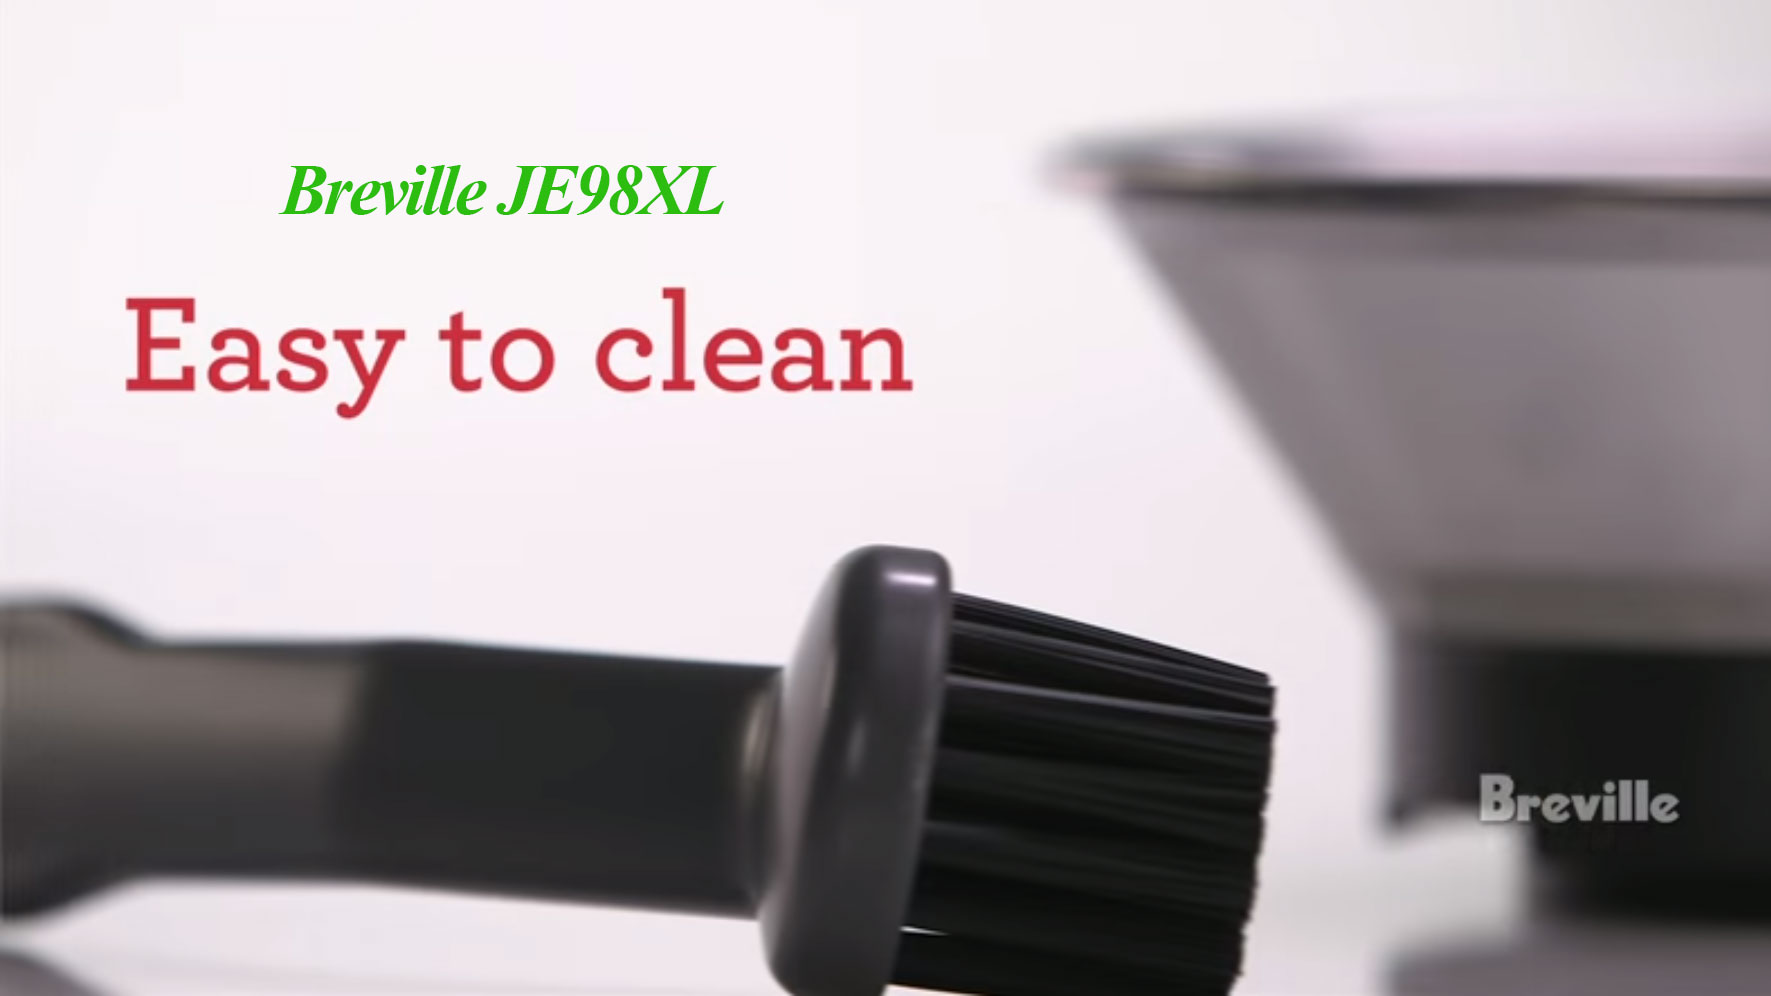 Breville JE98XL easy to clean